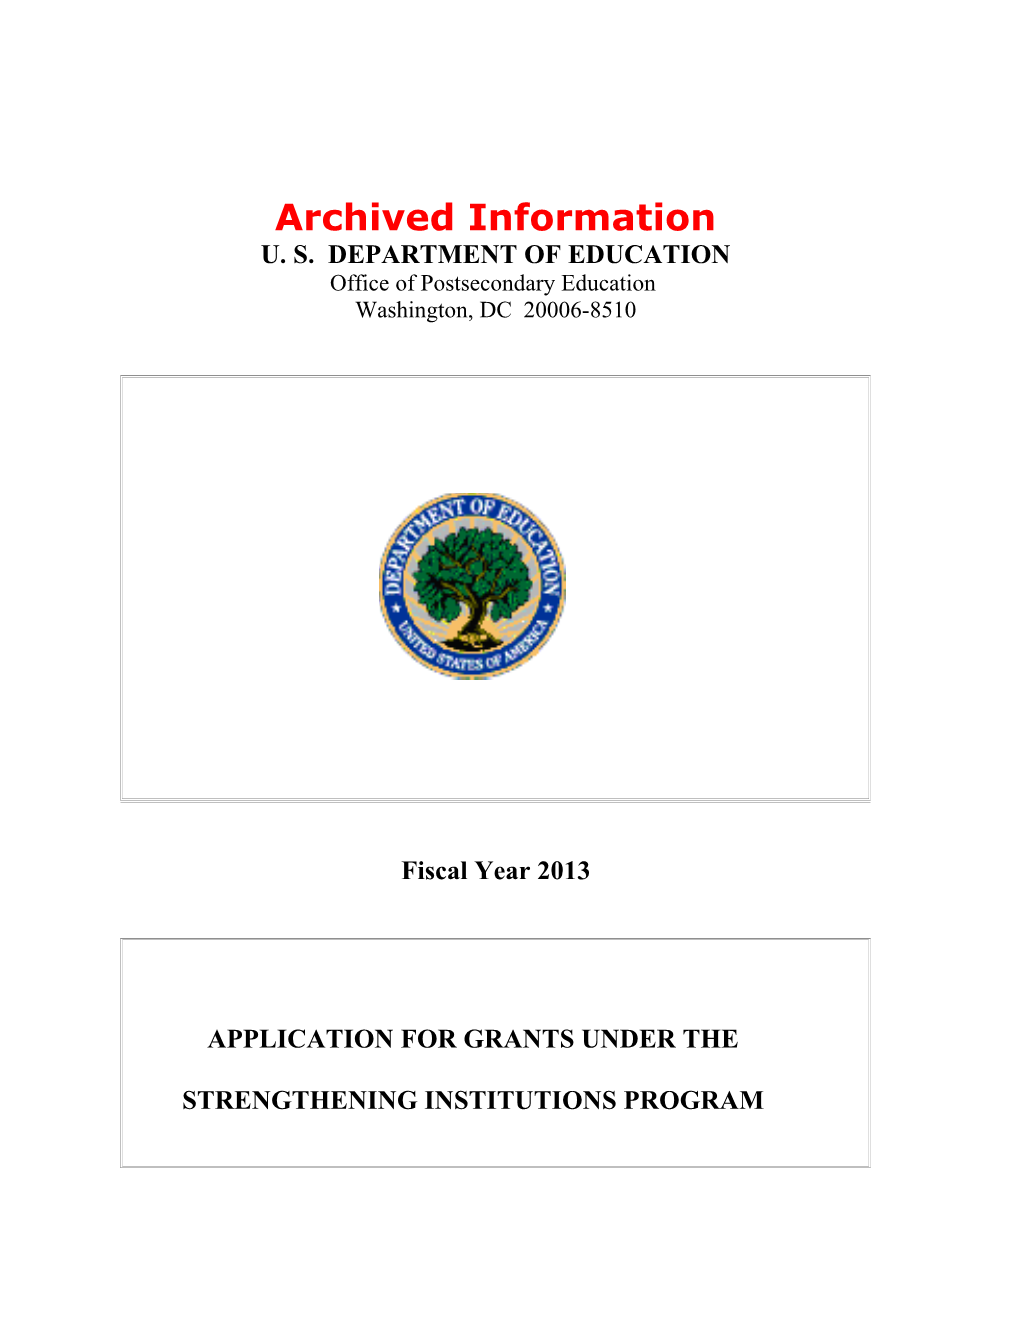 Archived FY 2013 Grant Application Under the Title III Part a Strengthening Institutions